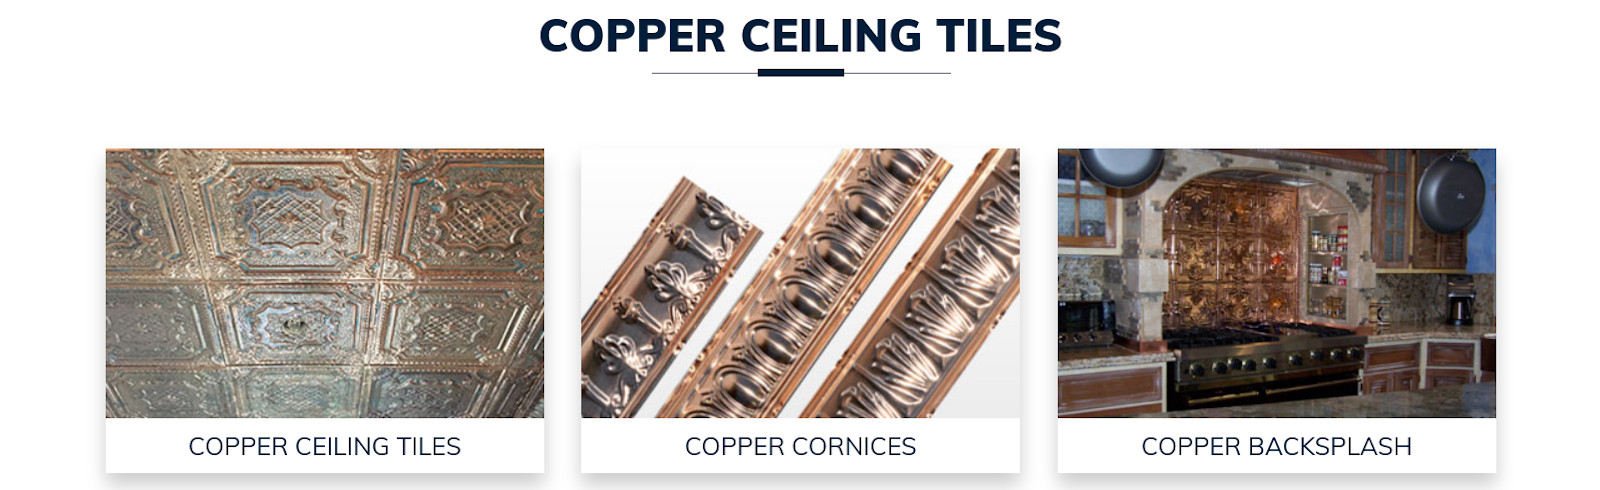 Low-priced copper ceiling tiles